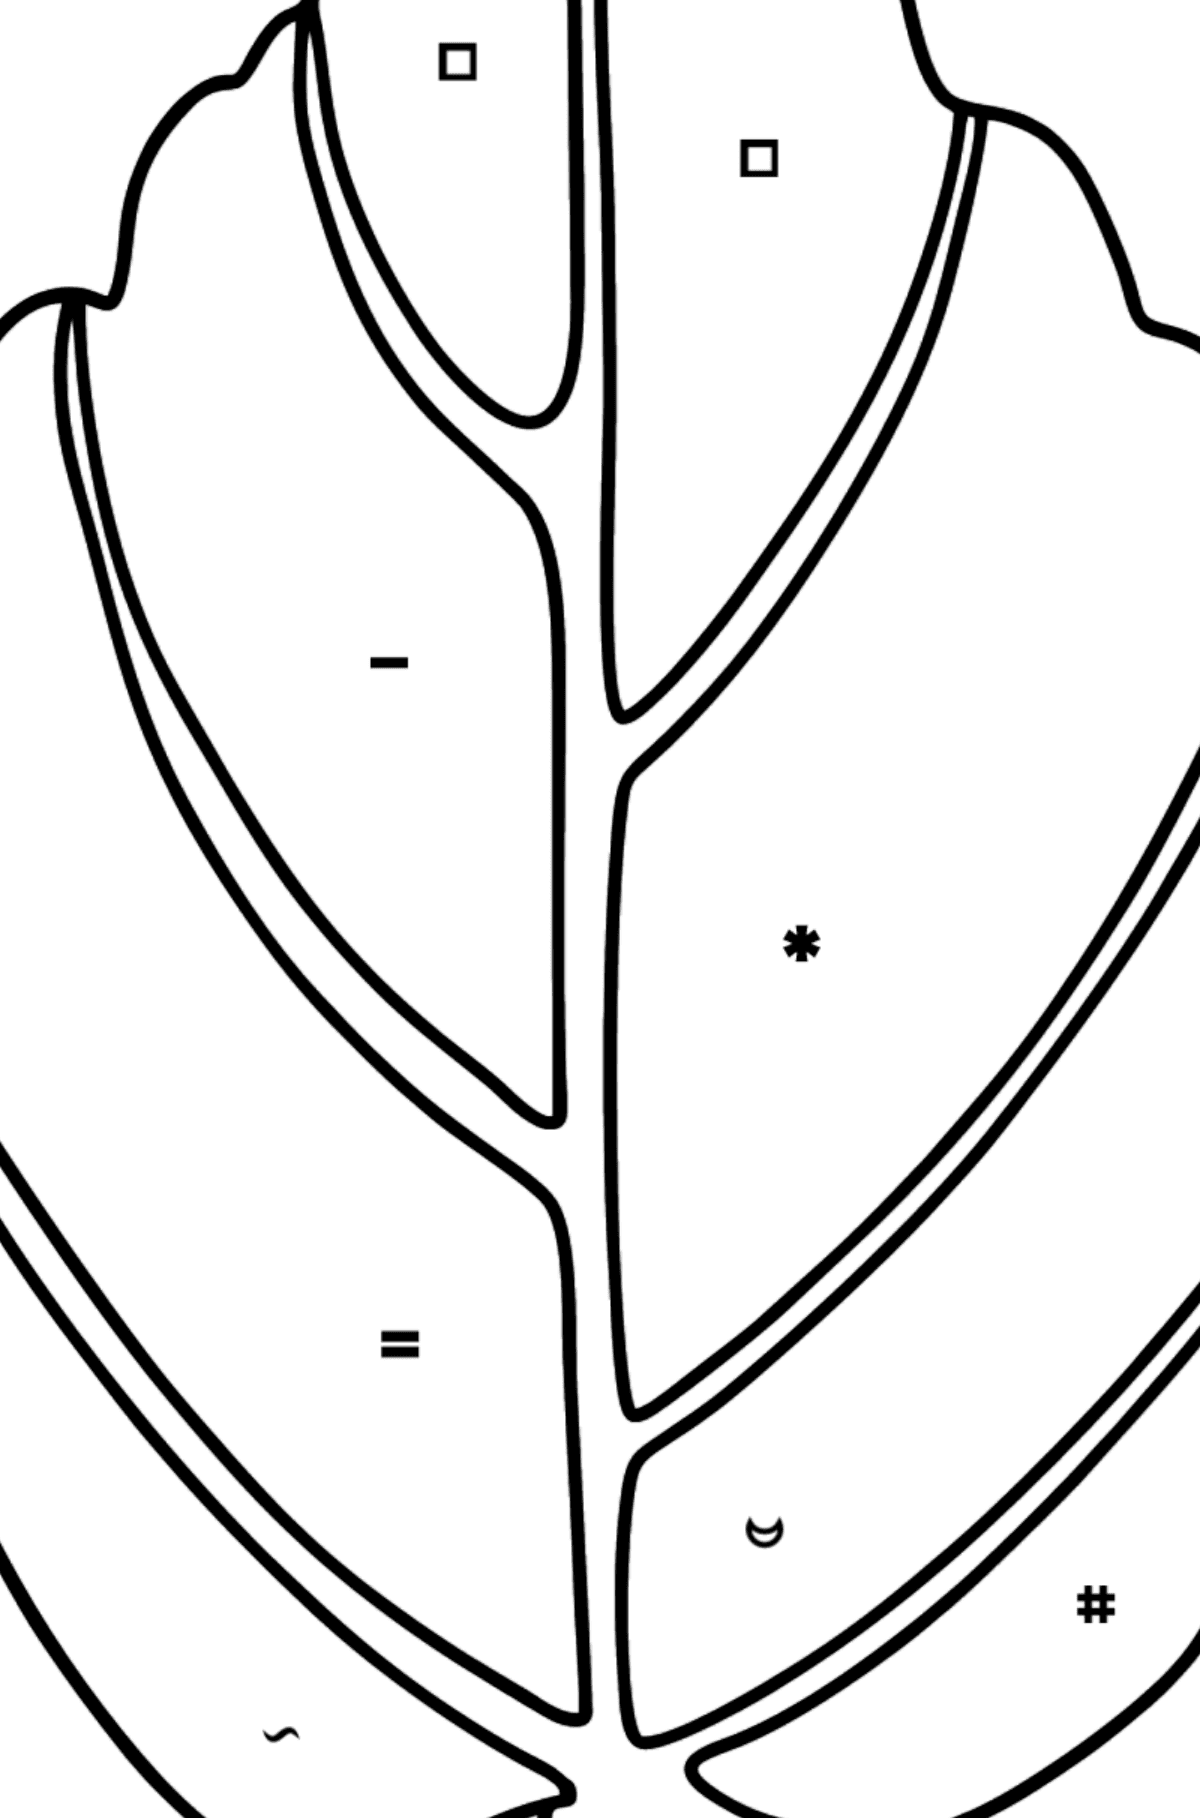 Hamamelis Leaf coloring page - Coloring by Symbols and Geometric Shapes for Kids